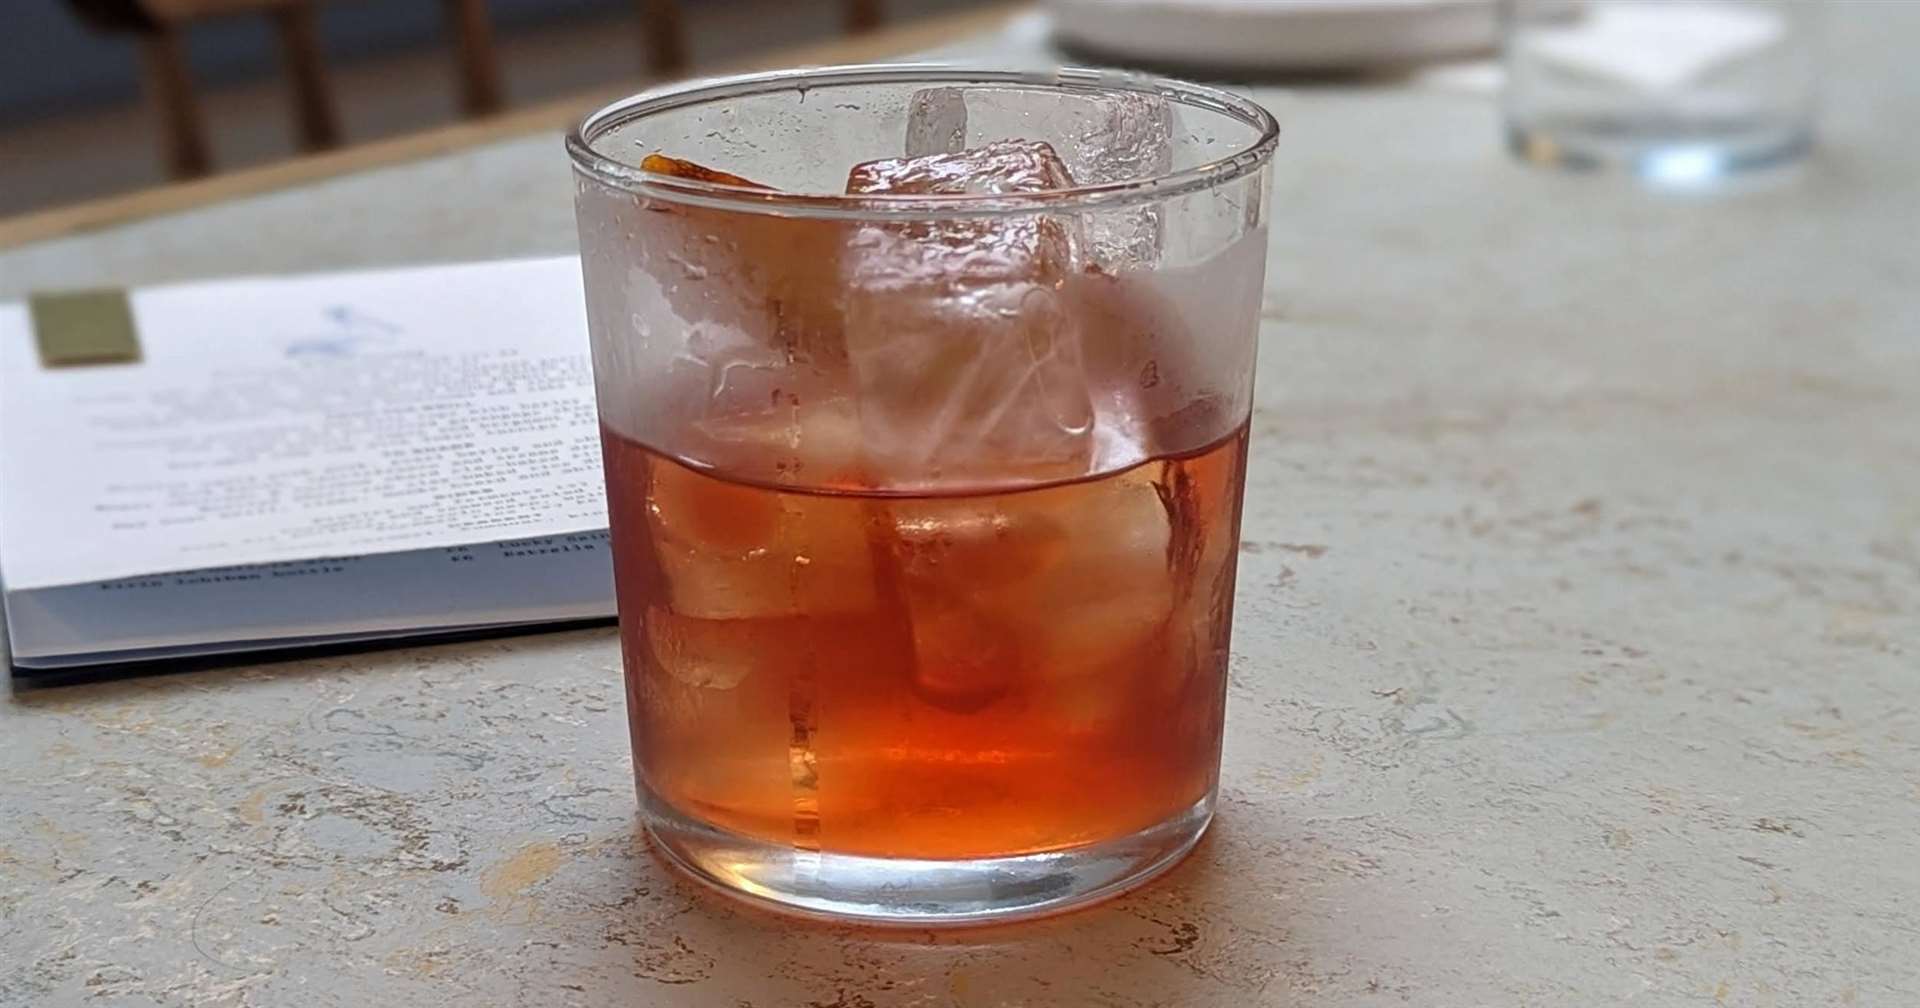 A negroni with a Japanese twist